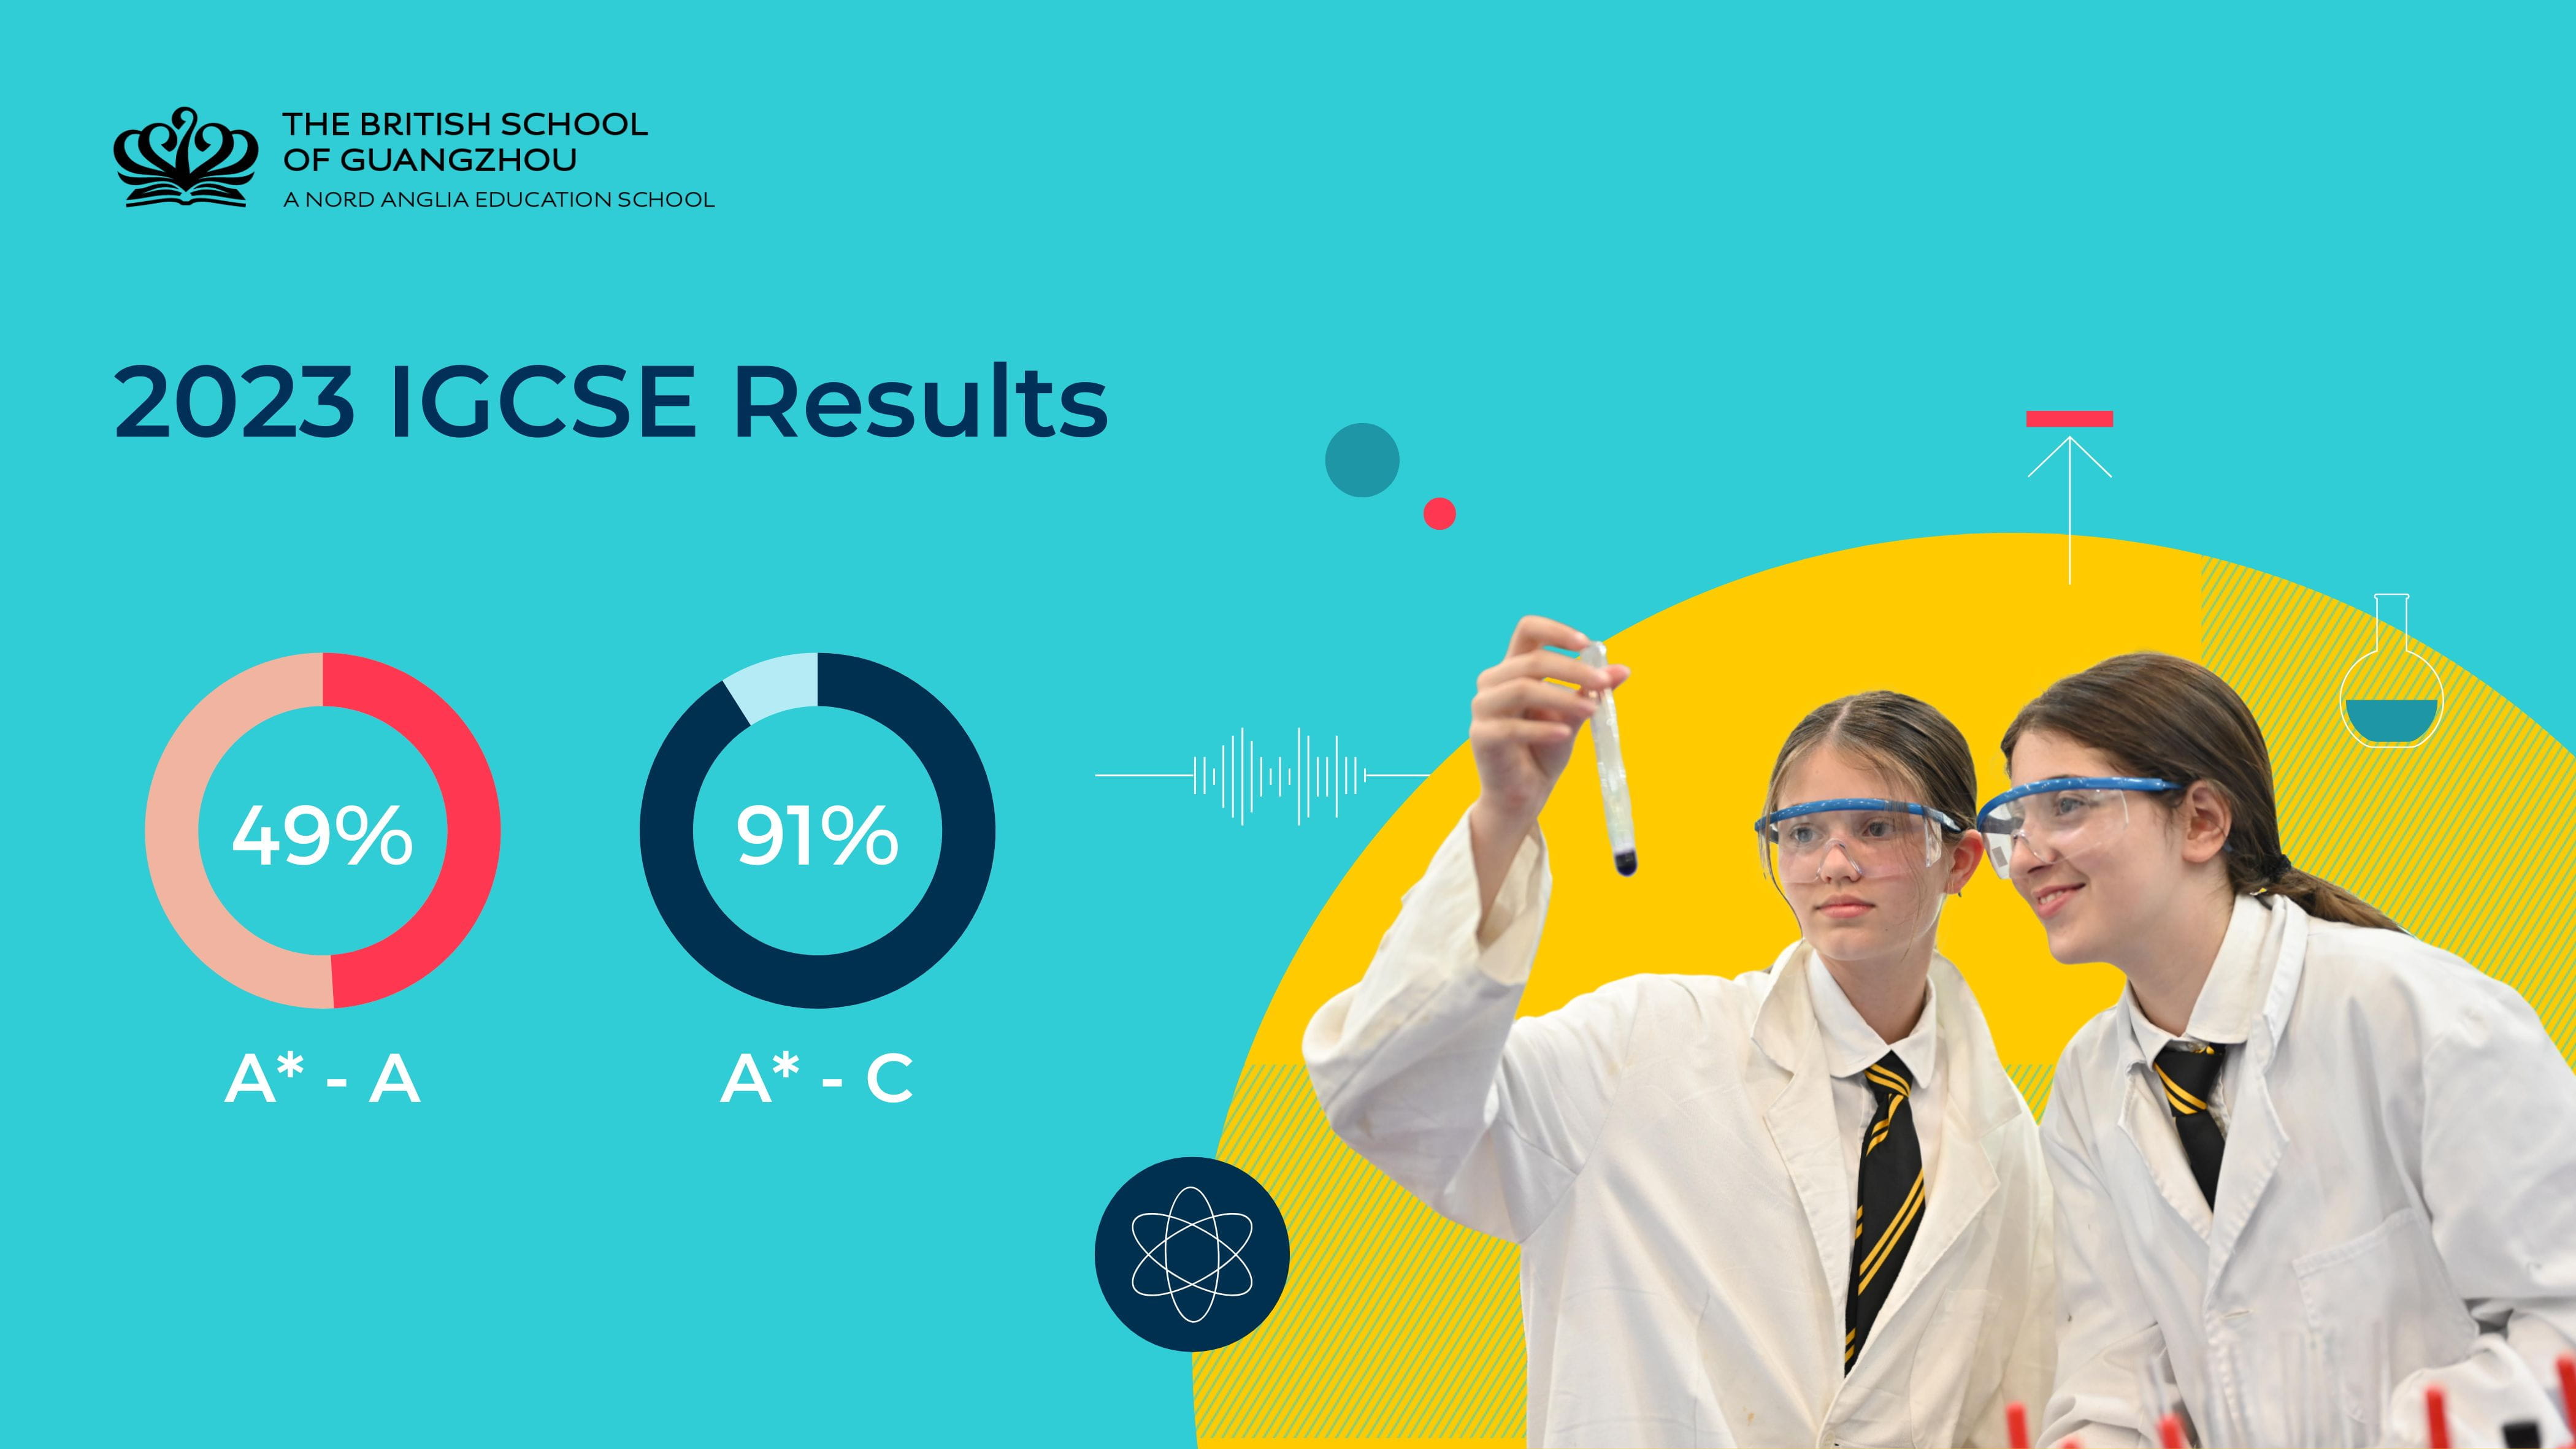 Outstanding IGCSE results at the British School of Guangzhou-Outstanding IGCSE results at the British School of Guangzhou-2023IGCSE